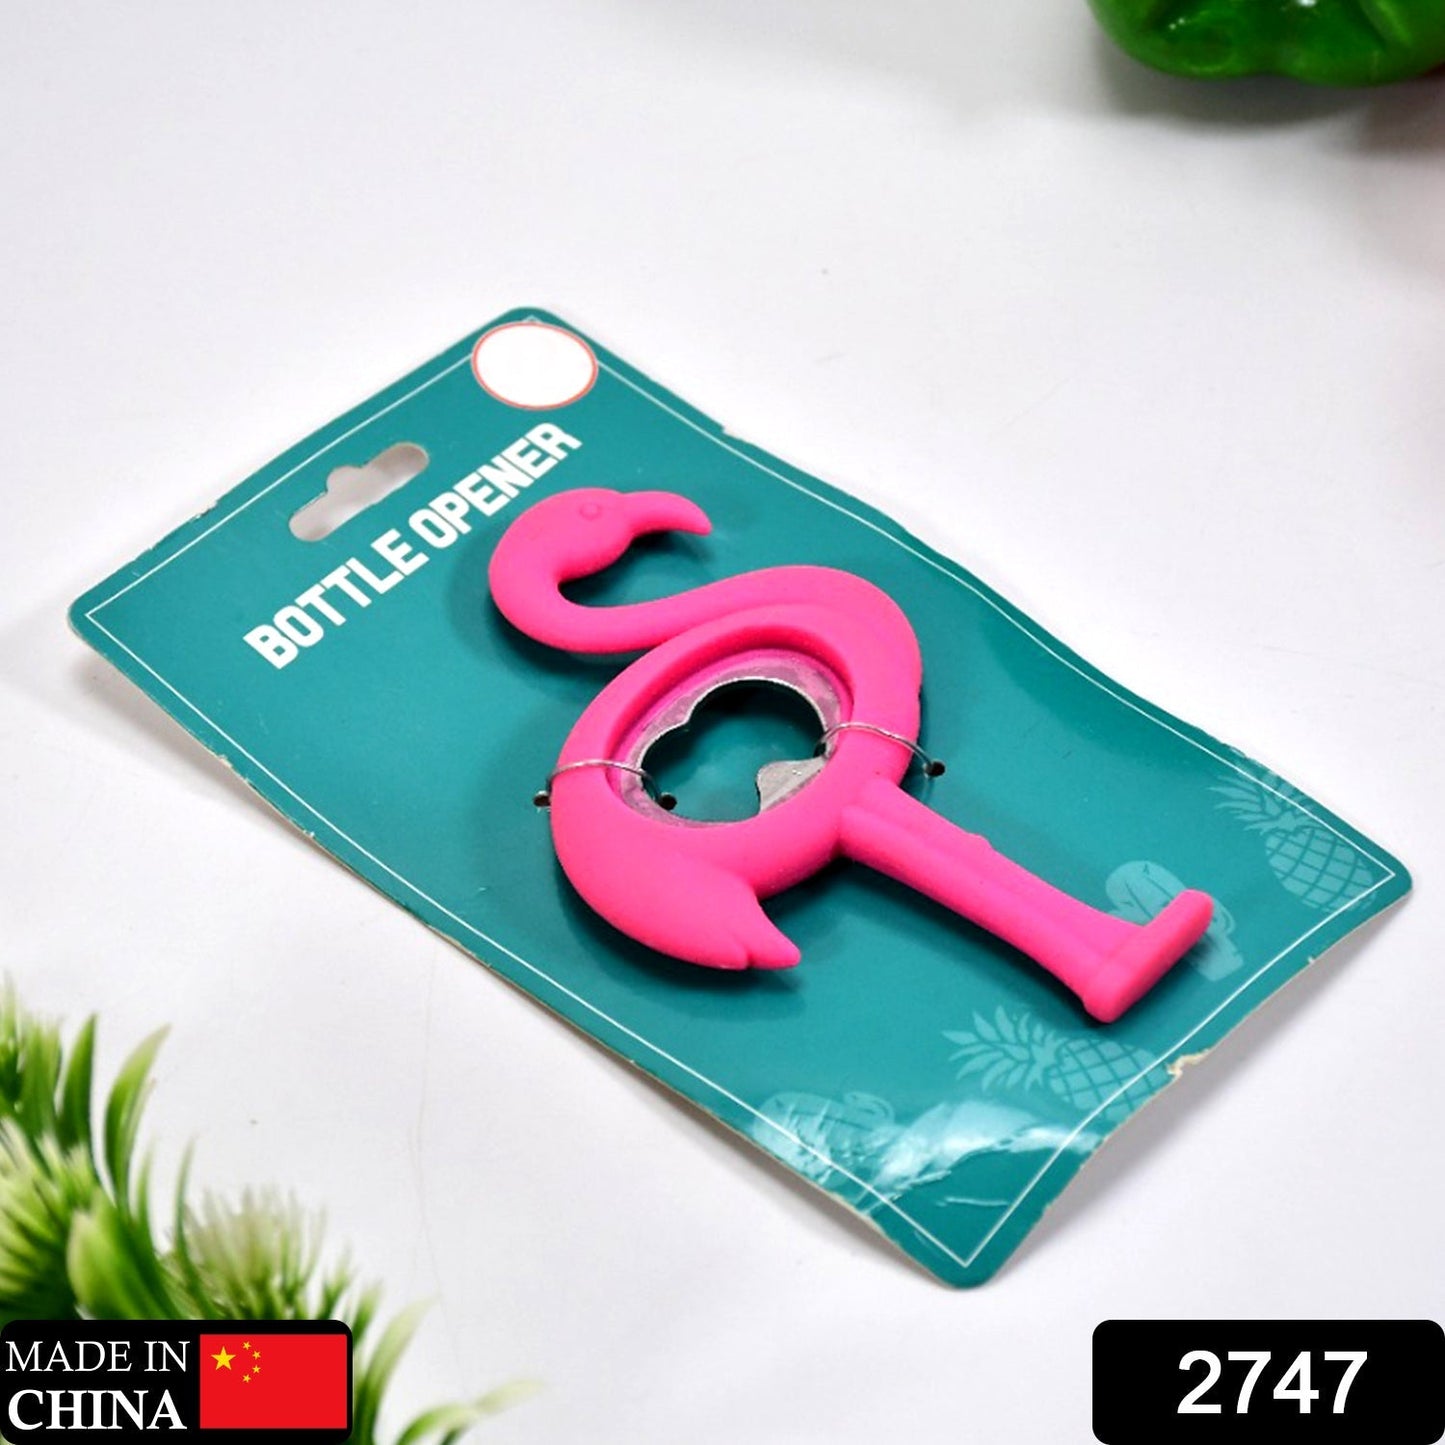 2747 Flamingo Novelty Bottle Opener - Ideal for Cocktail Parties - Made from Silicone and Stainless Steel DeoDap